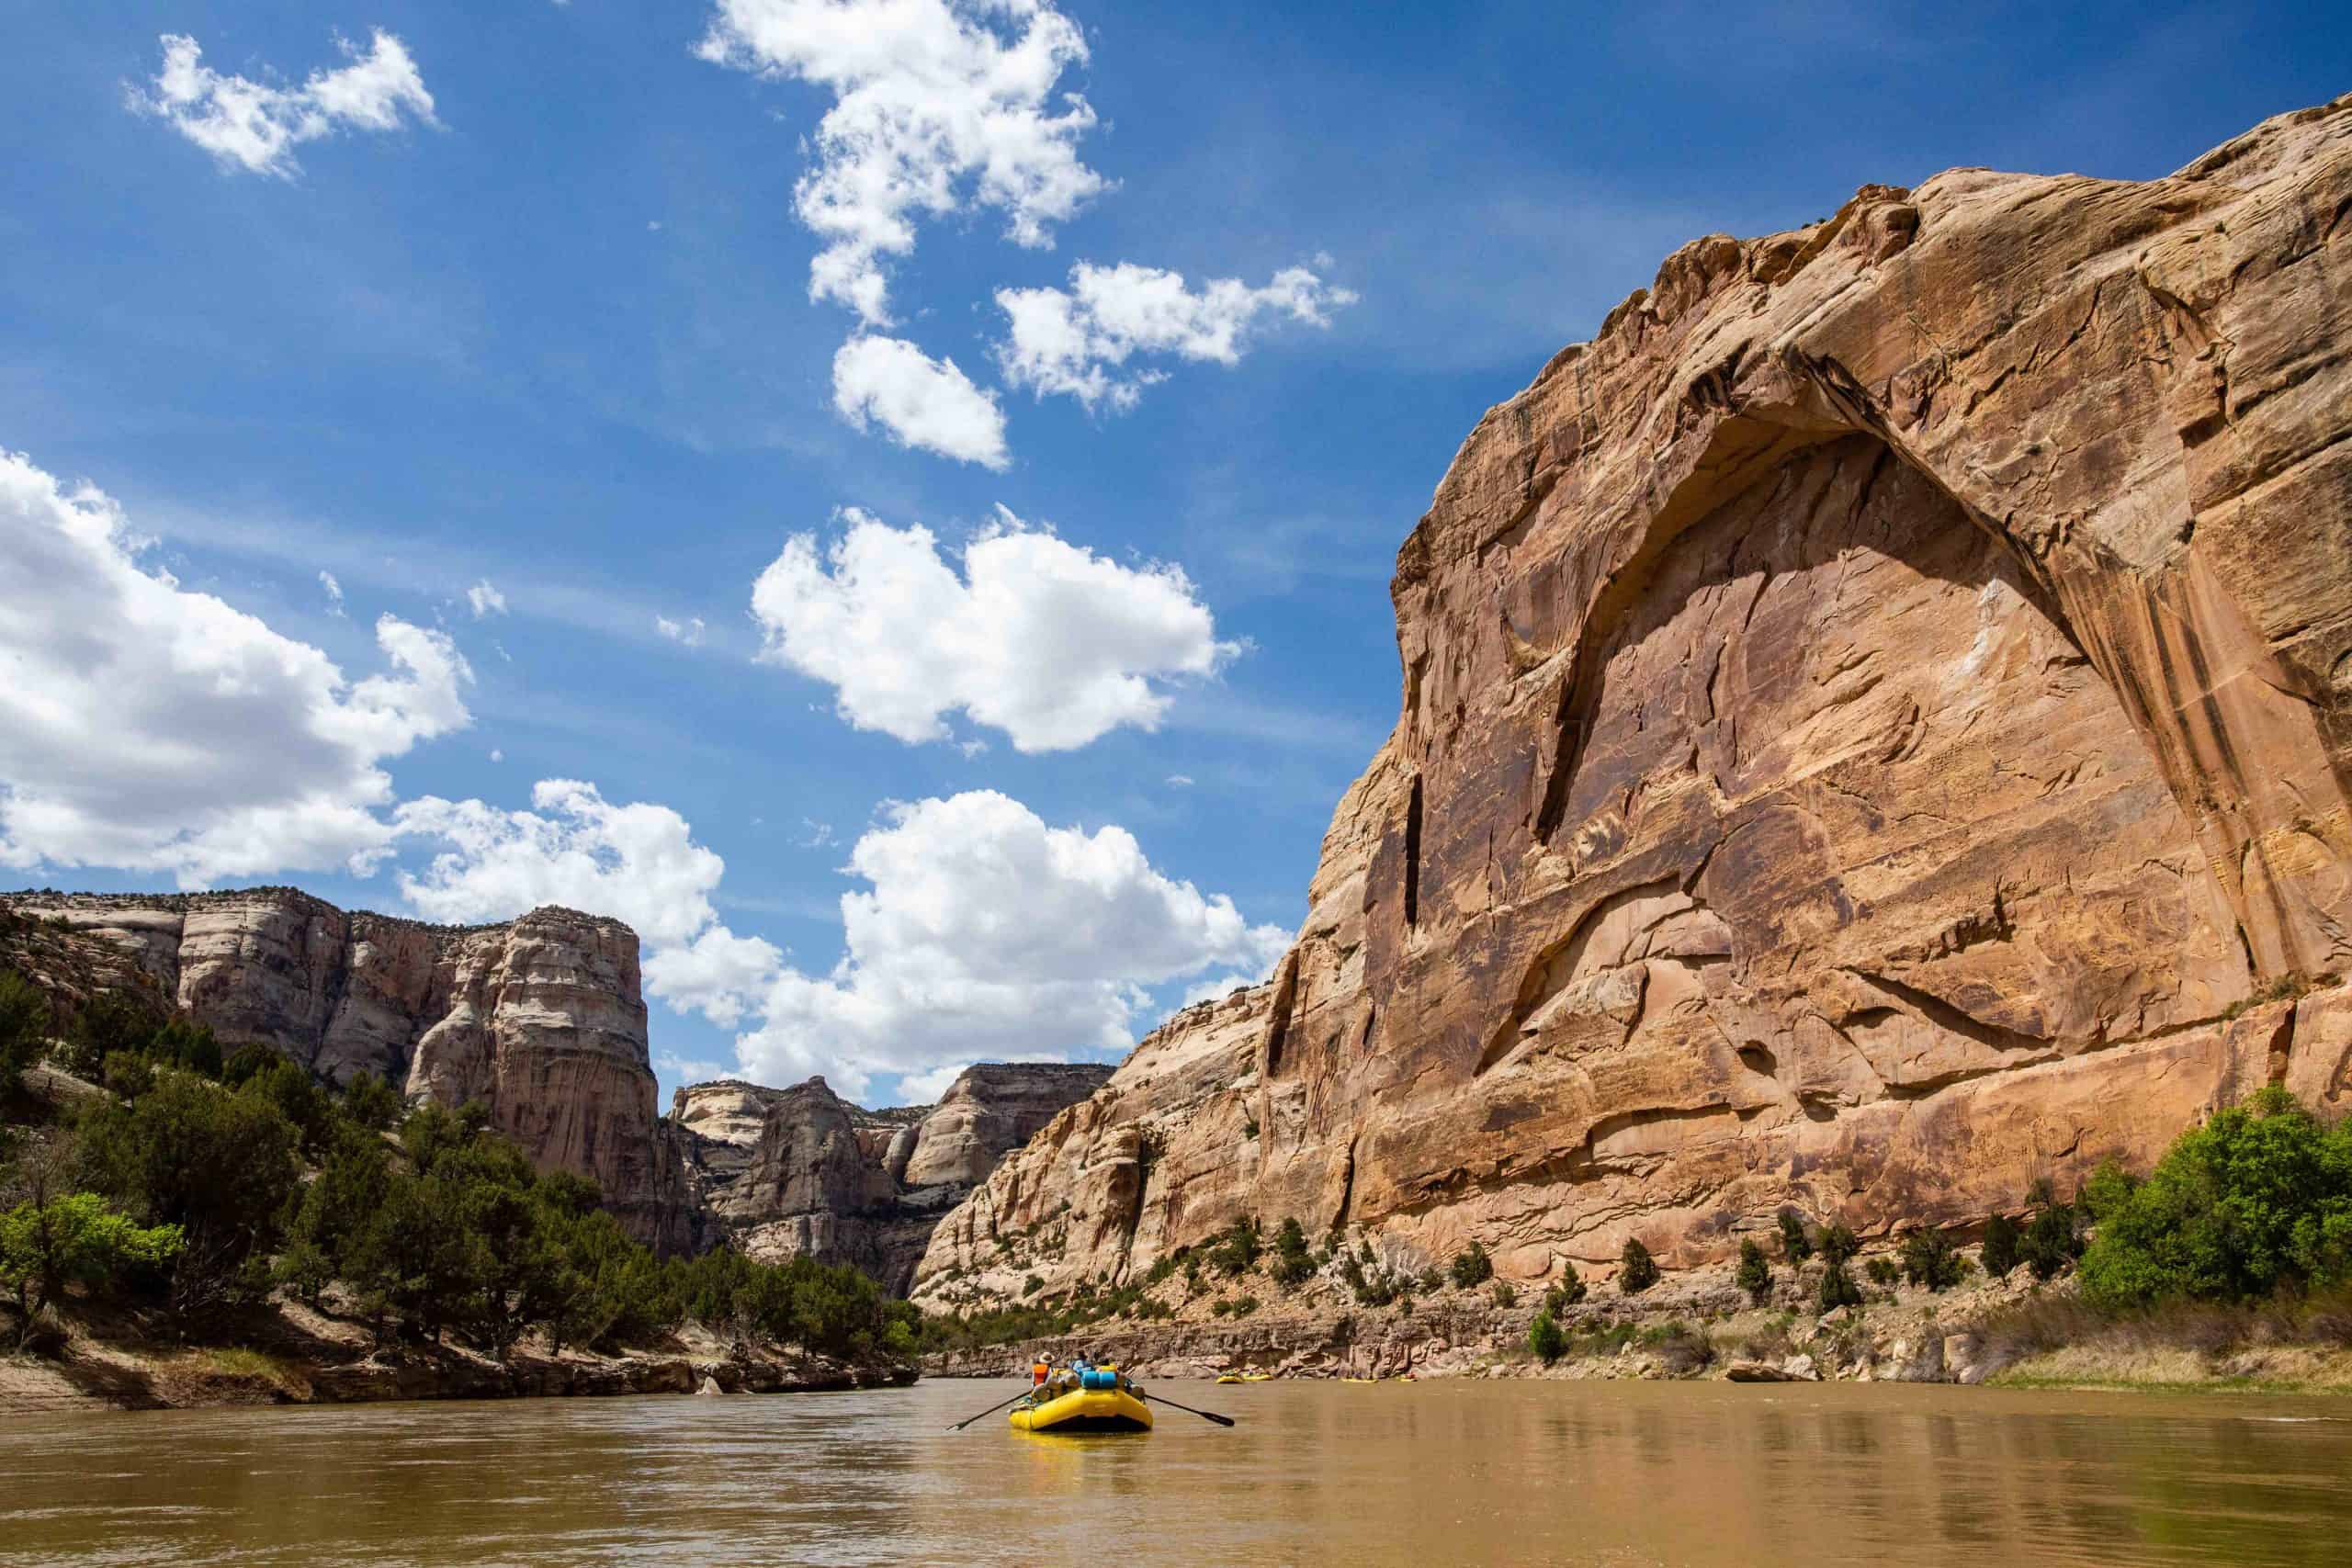 Rafting the Yampa River